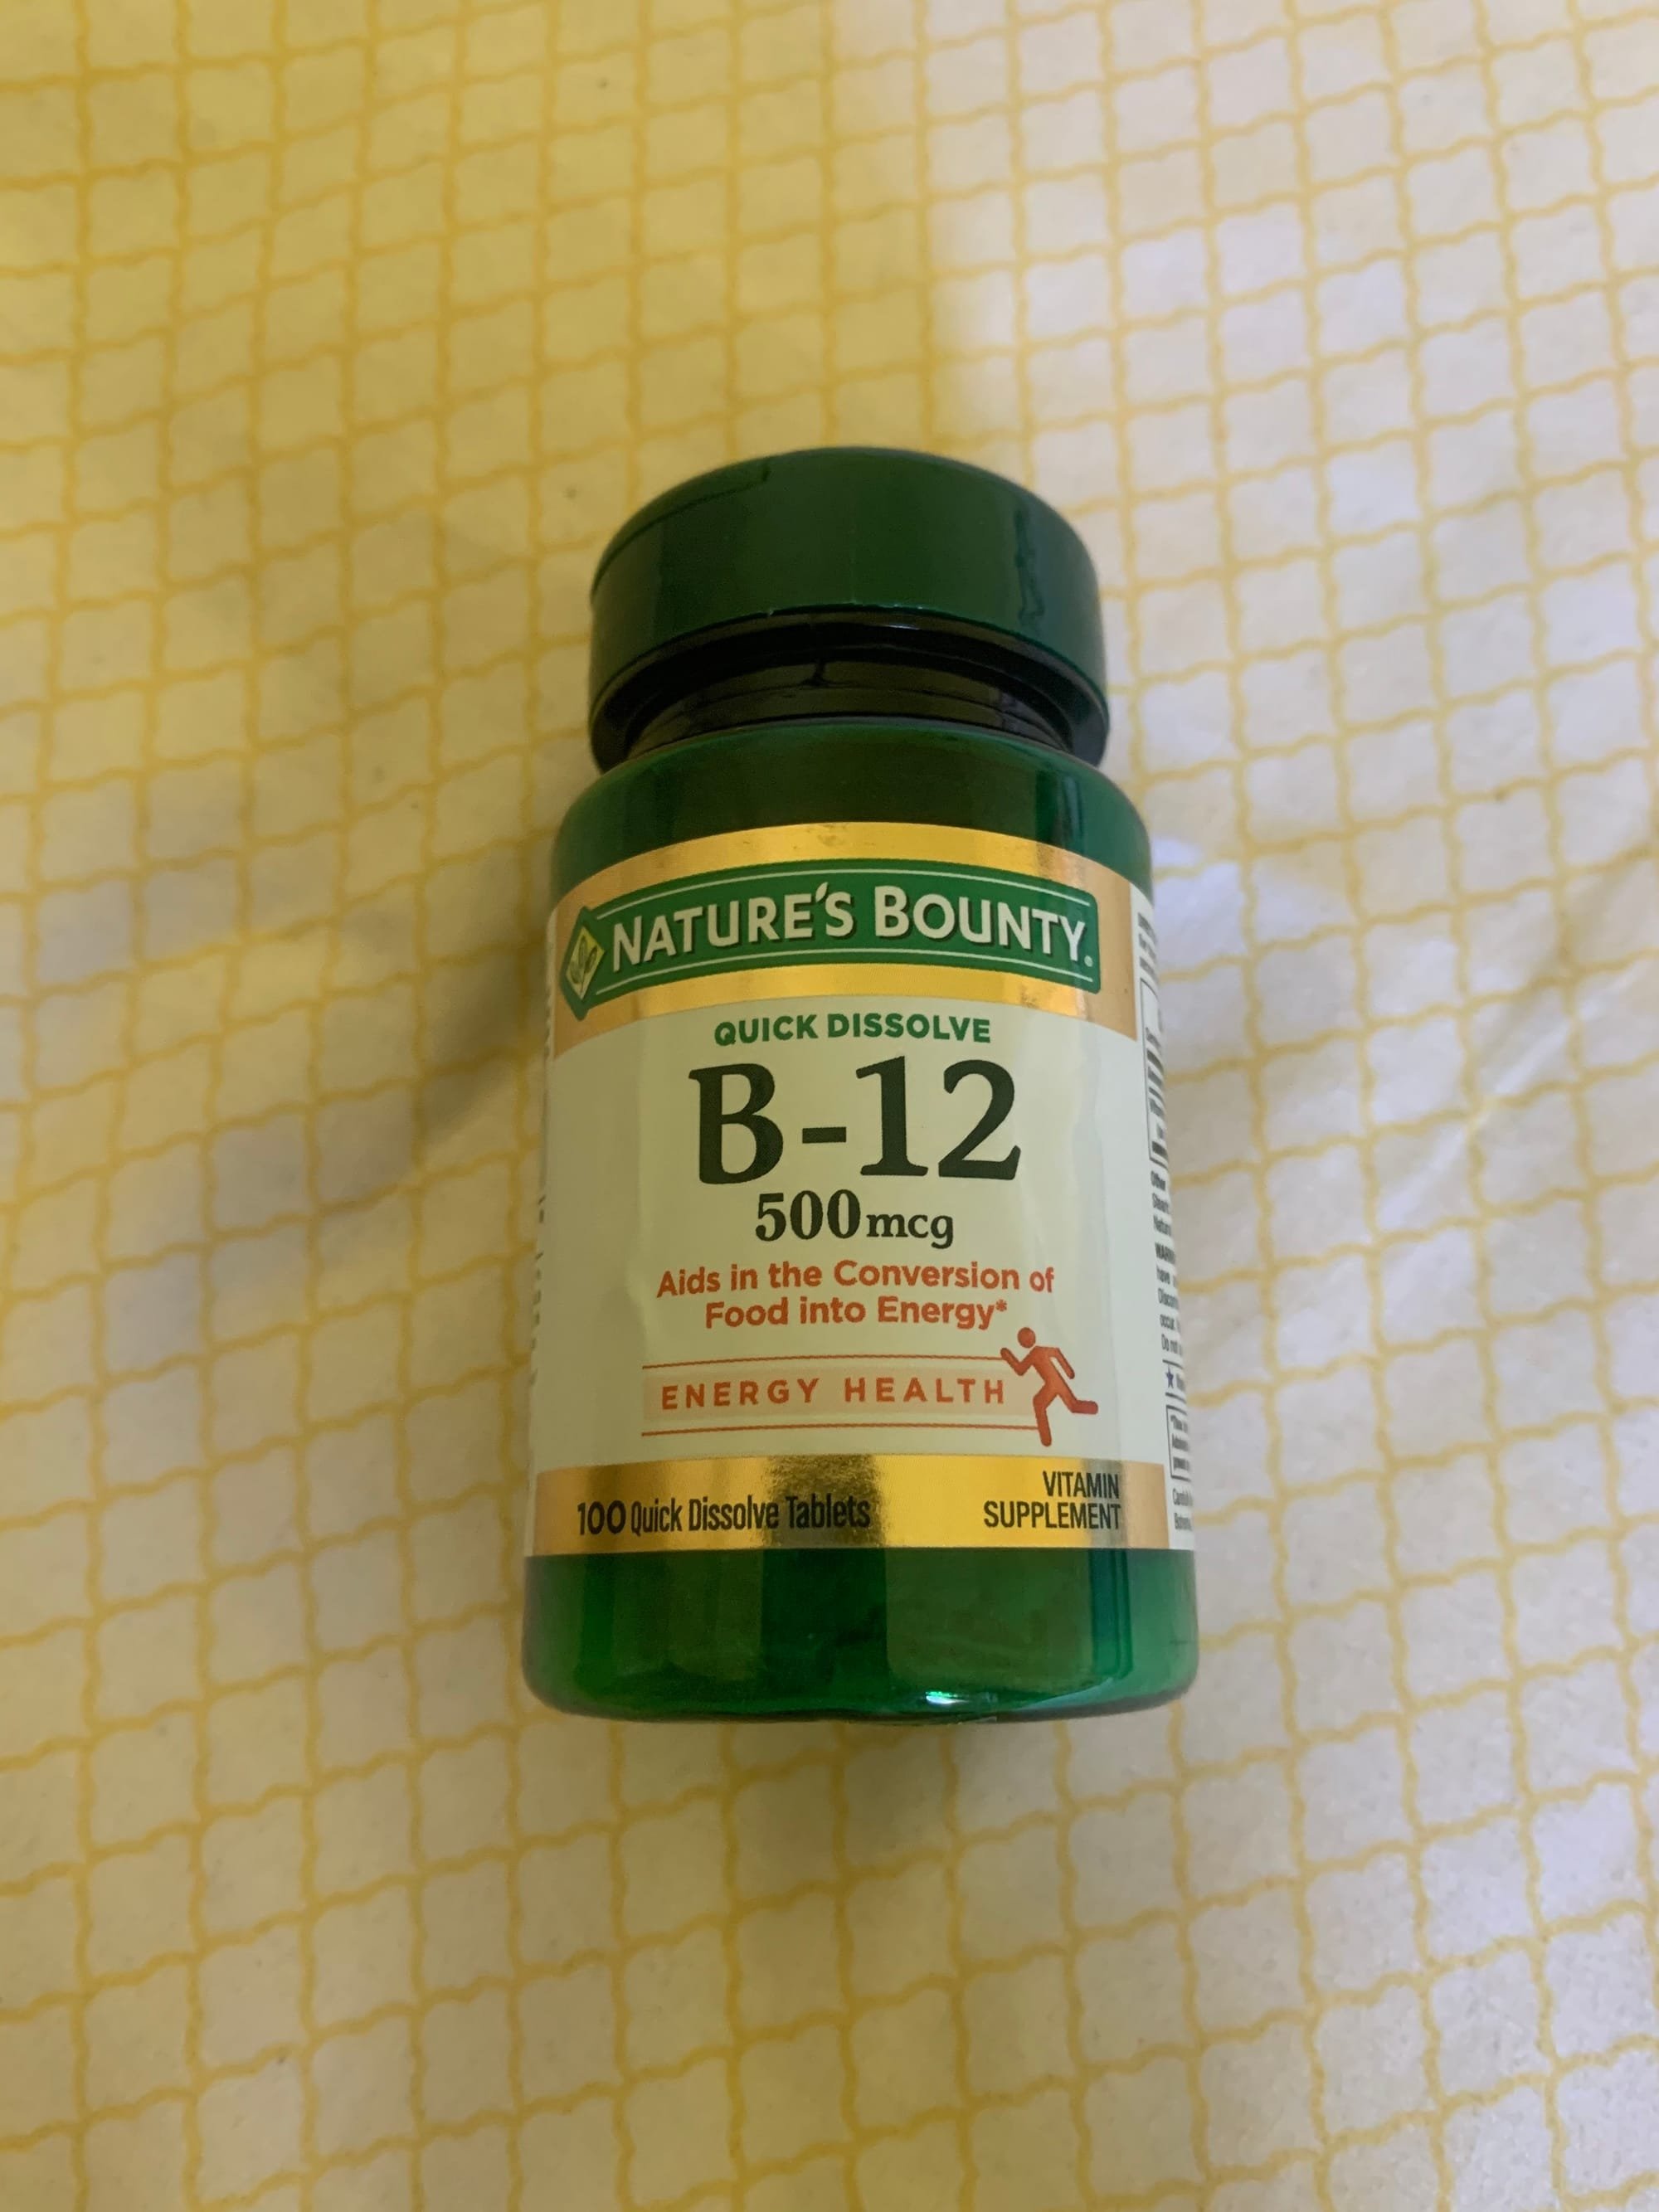 If You're Like Me, You Probably Need a B-12 Supplement